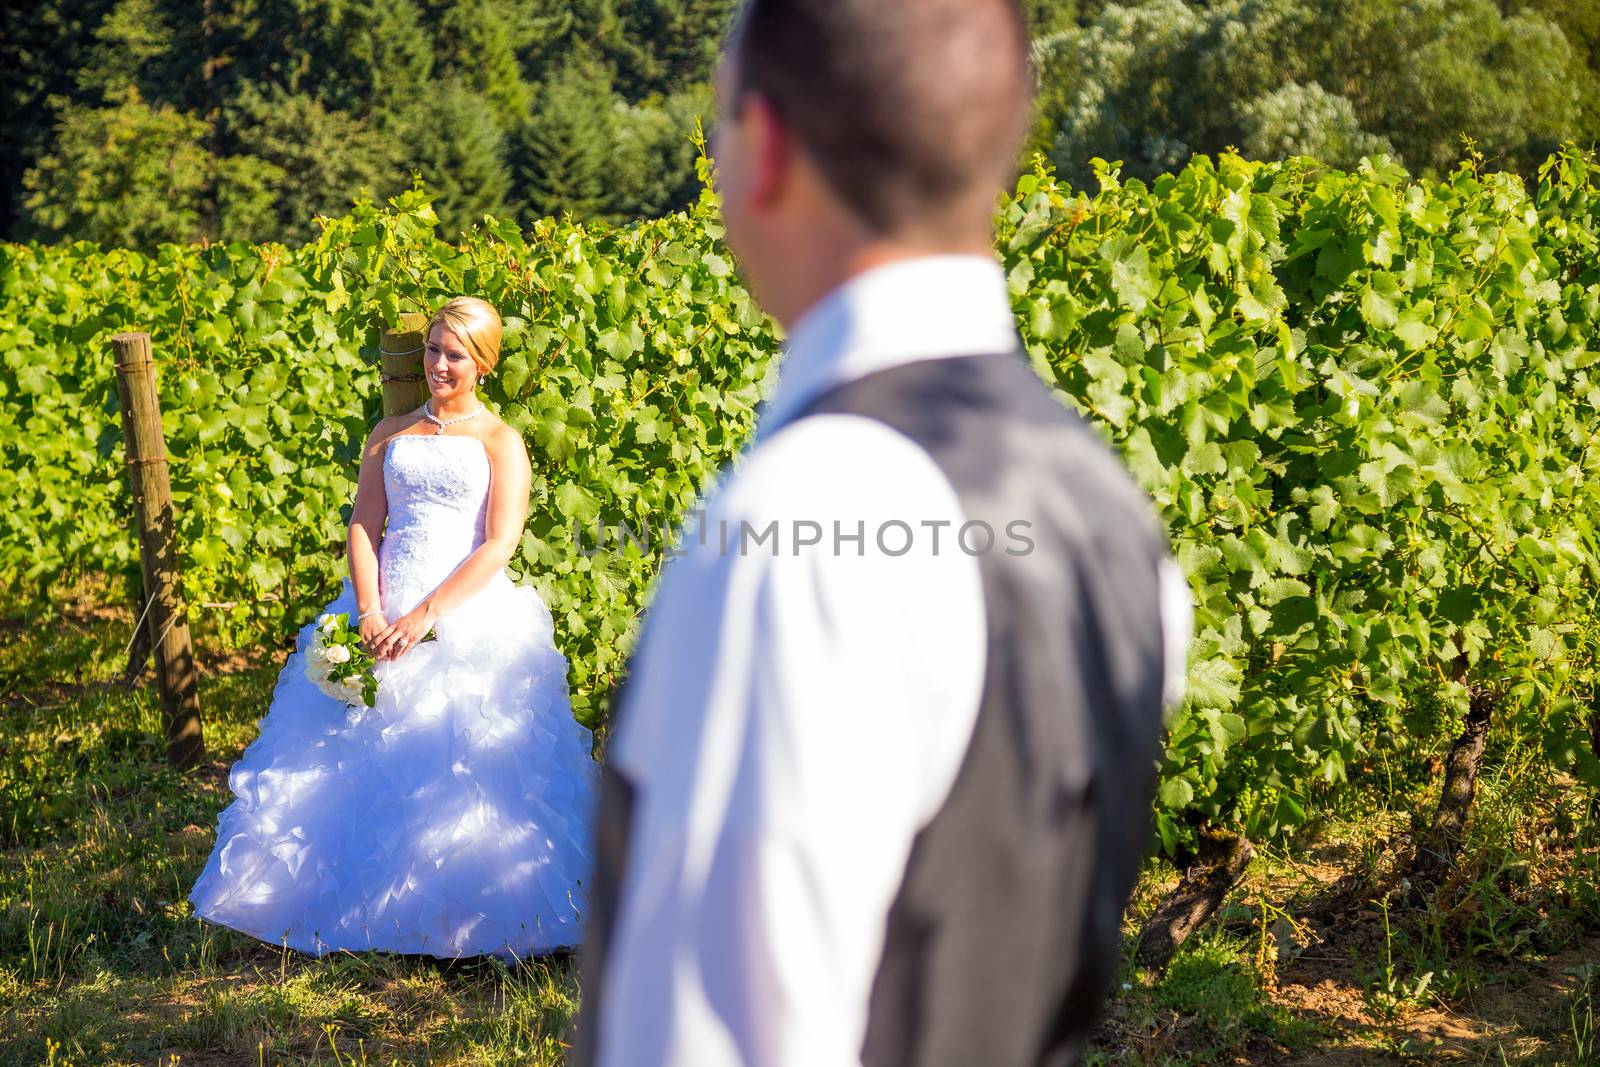 A shallow depth of field is used on this shallow focus layered shot of a bride and groom on their wedding day at a vineyard winery in Portland Oregon.